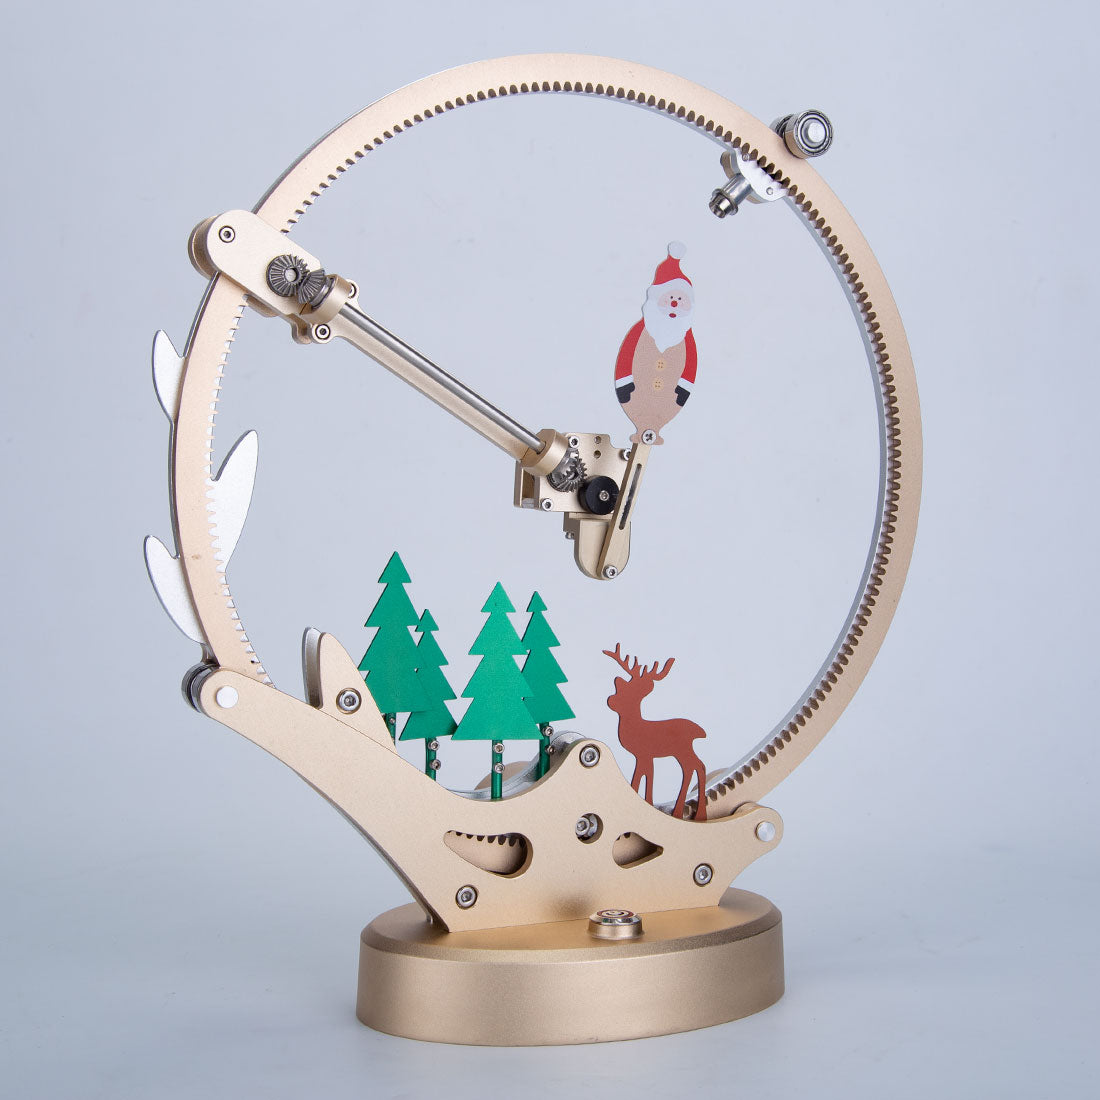 Build a Santa Claus Forest Kits That Works 3D Metal Puzzle Christmas Gifts Teching